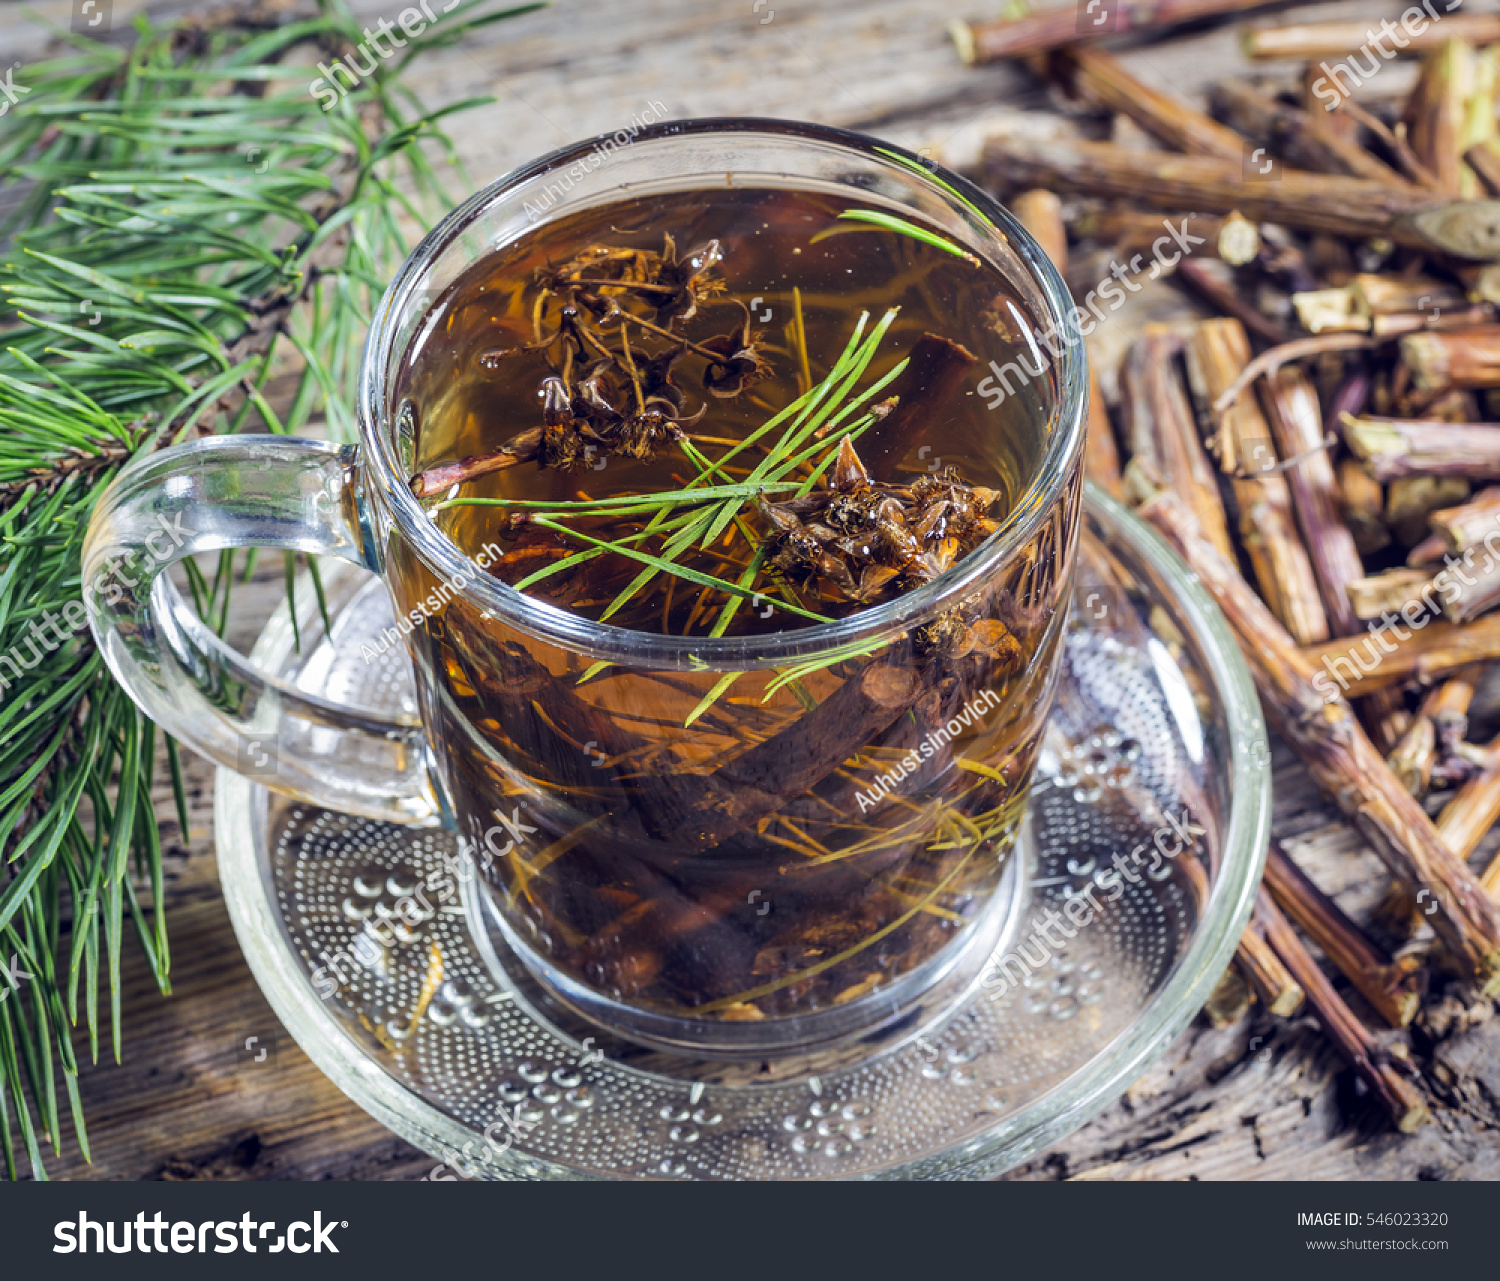 Useful tea from dry branches raspberries and pine needles #546023320